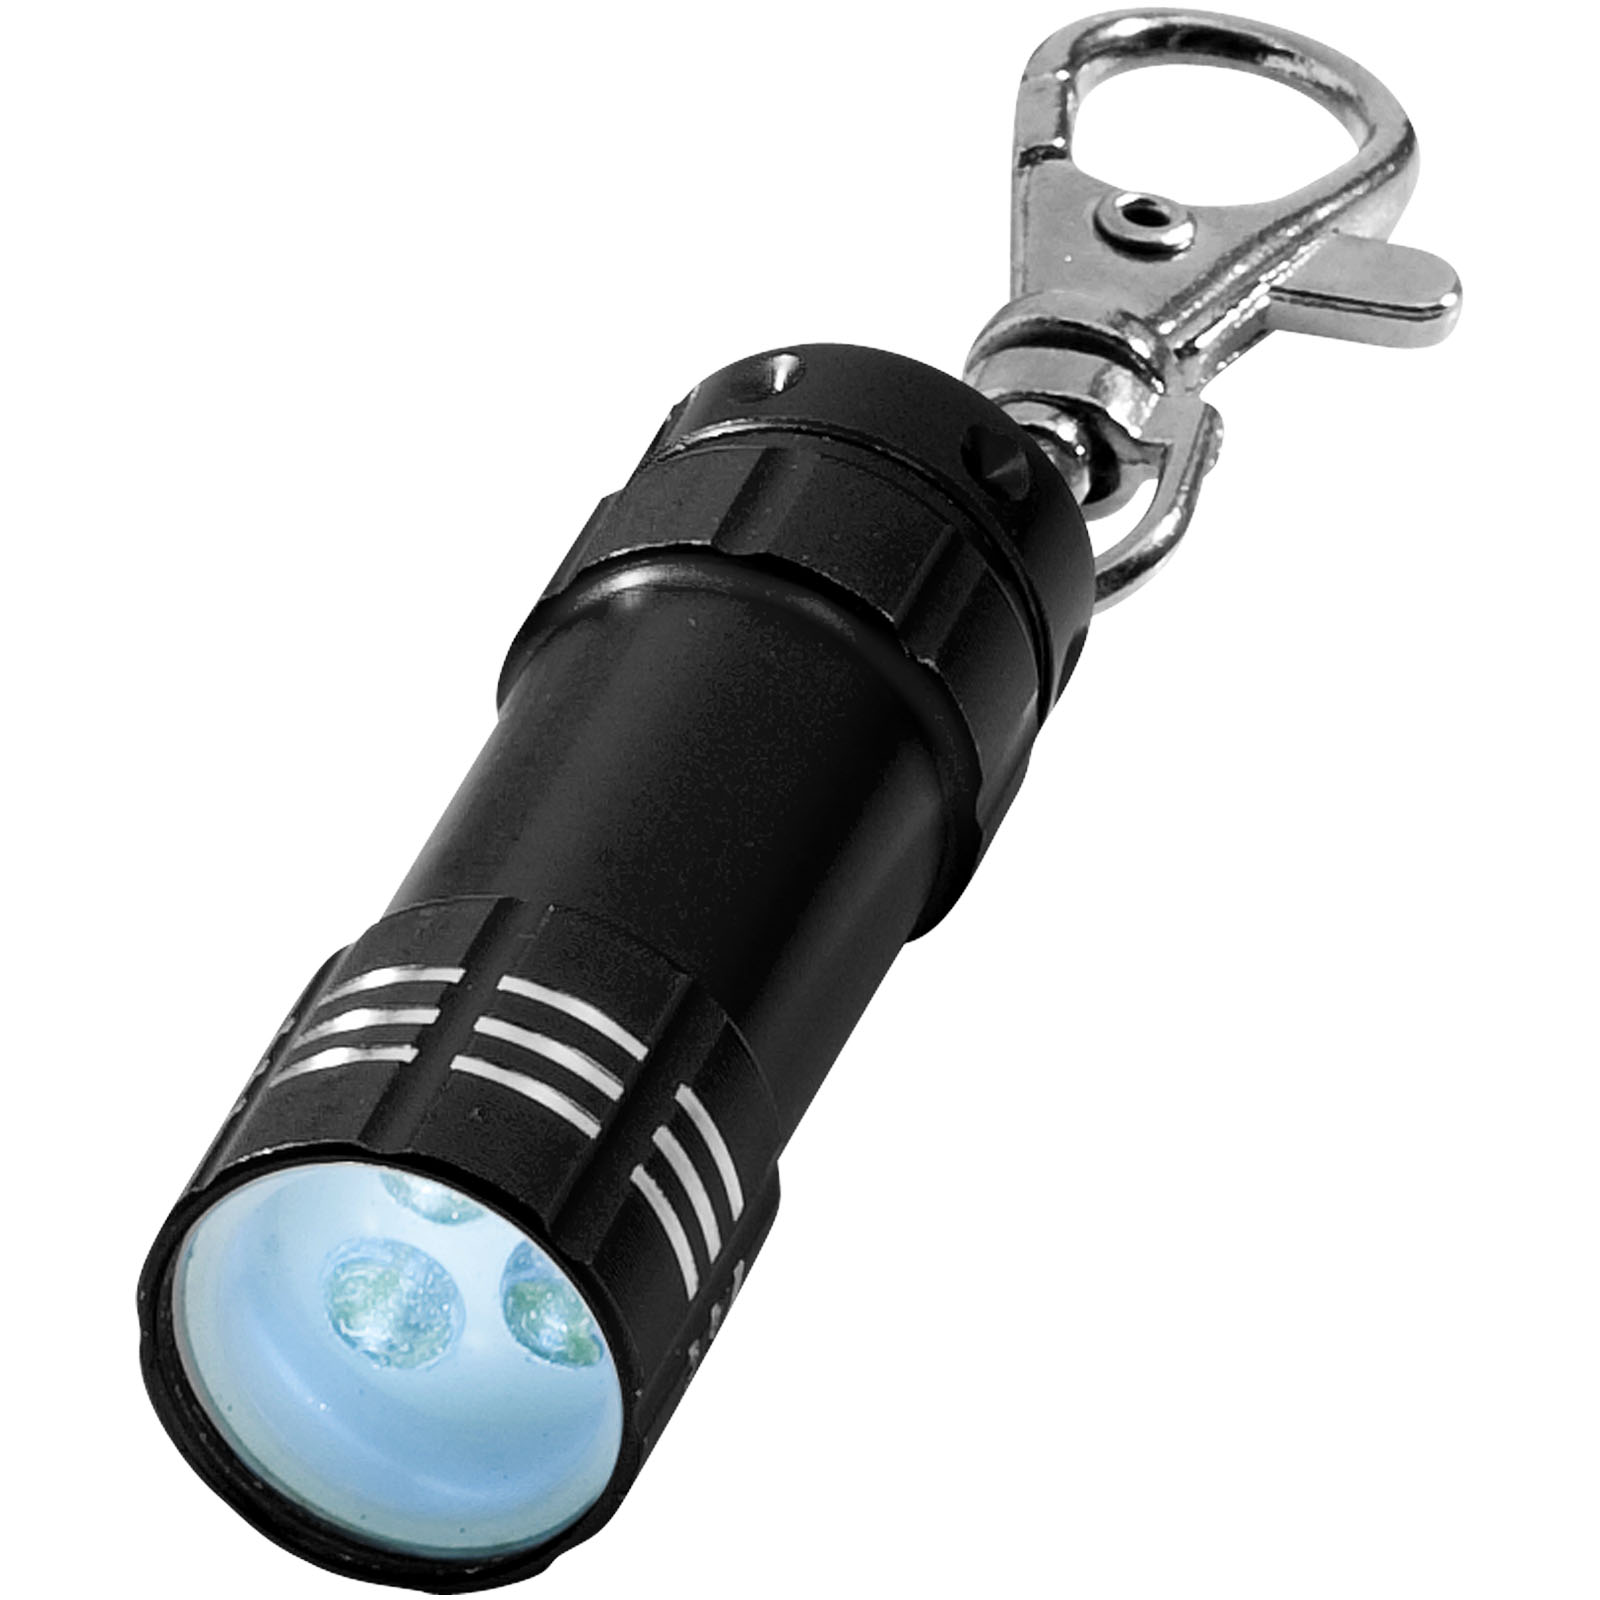 Advertising Lamps - Astro LED keychain light